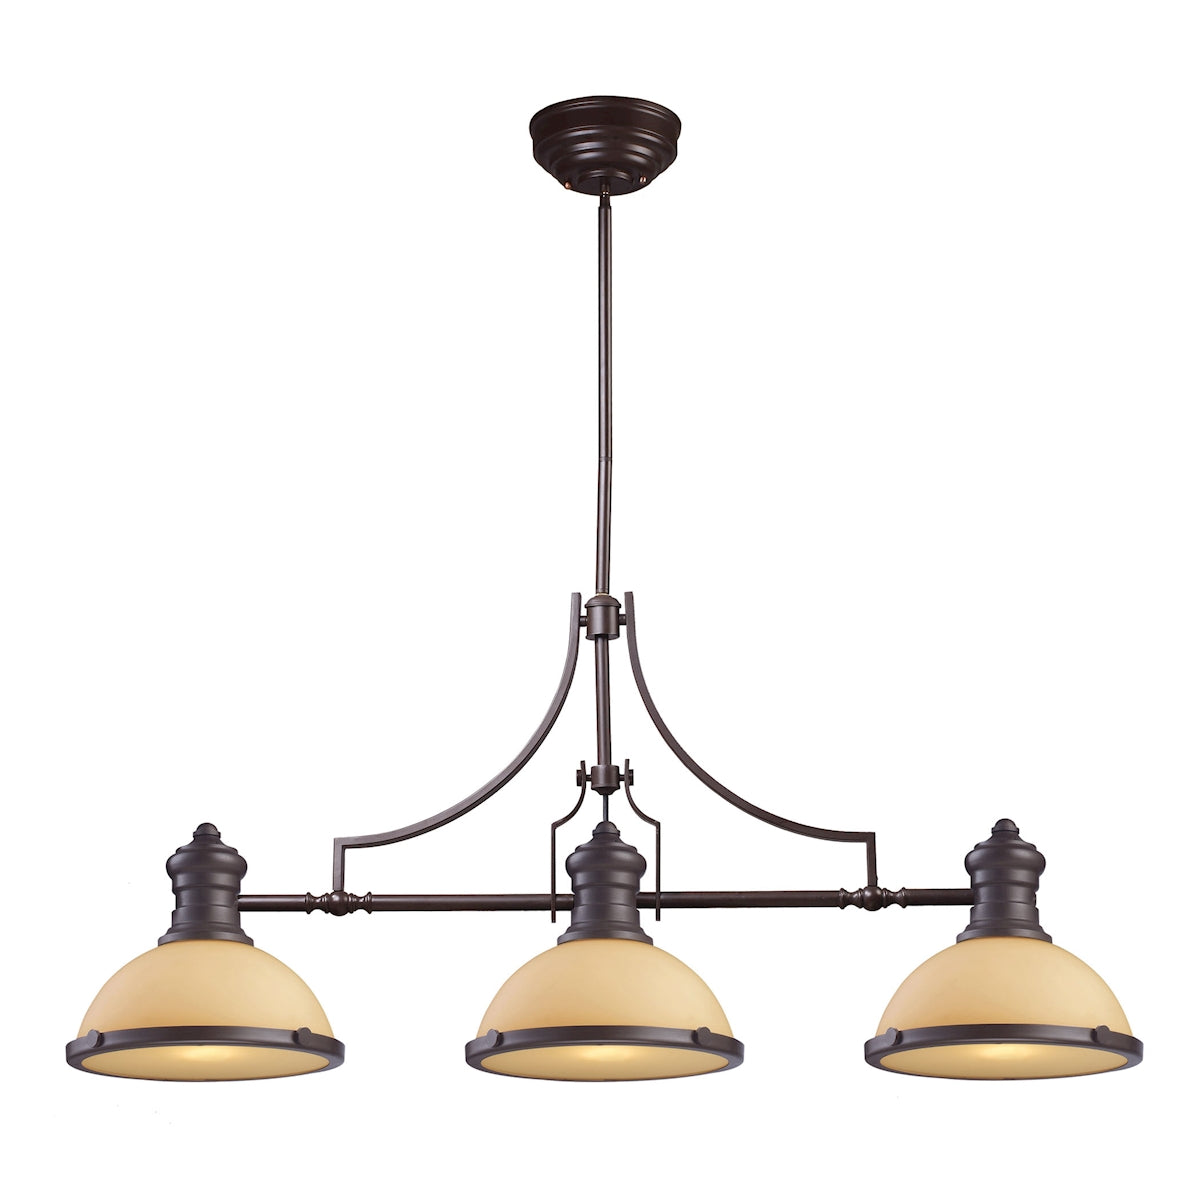 Chadwick 3-Light Island Light in Oiled Bronze with Off-white Glass